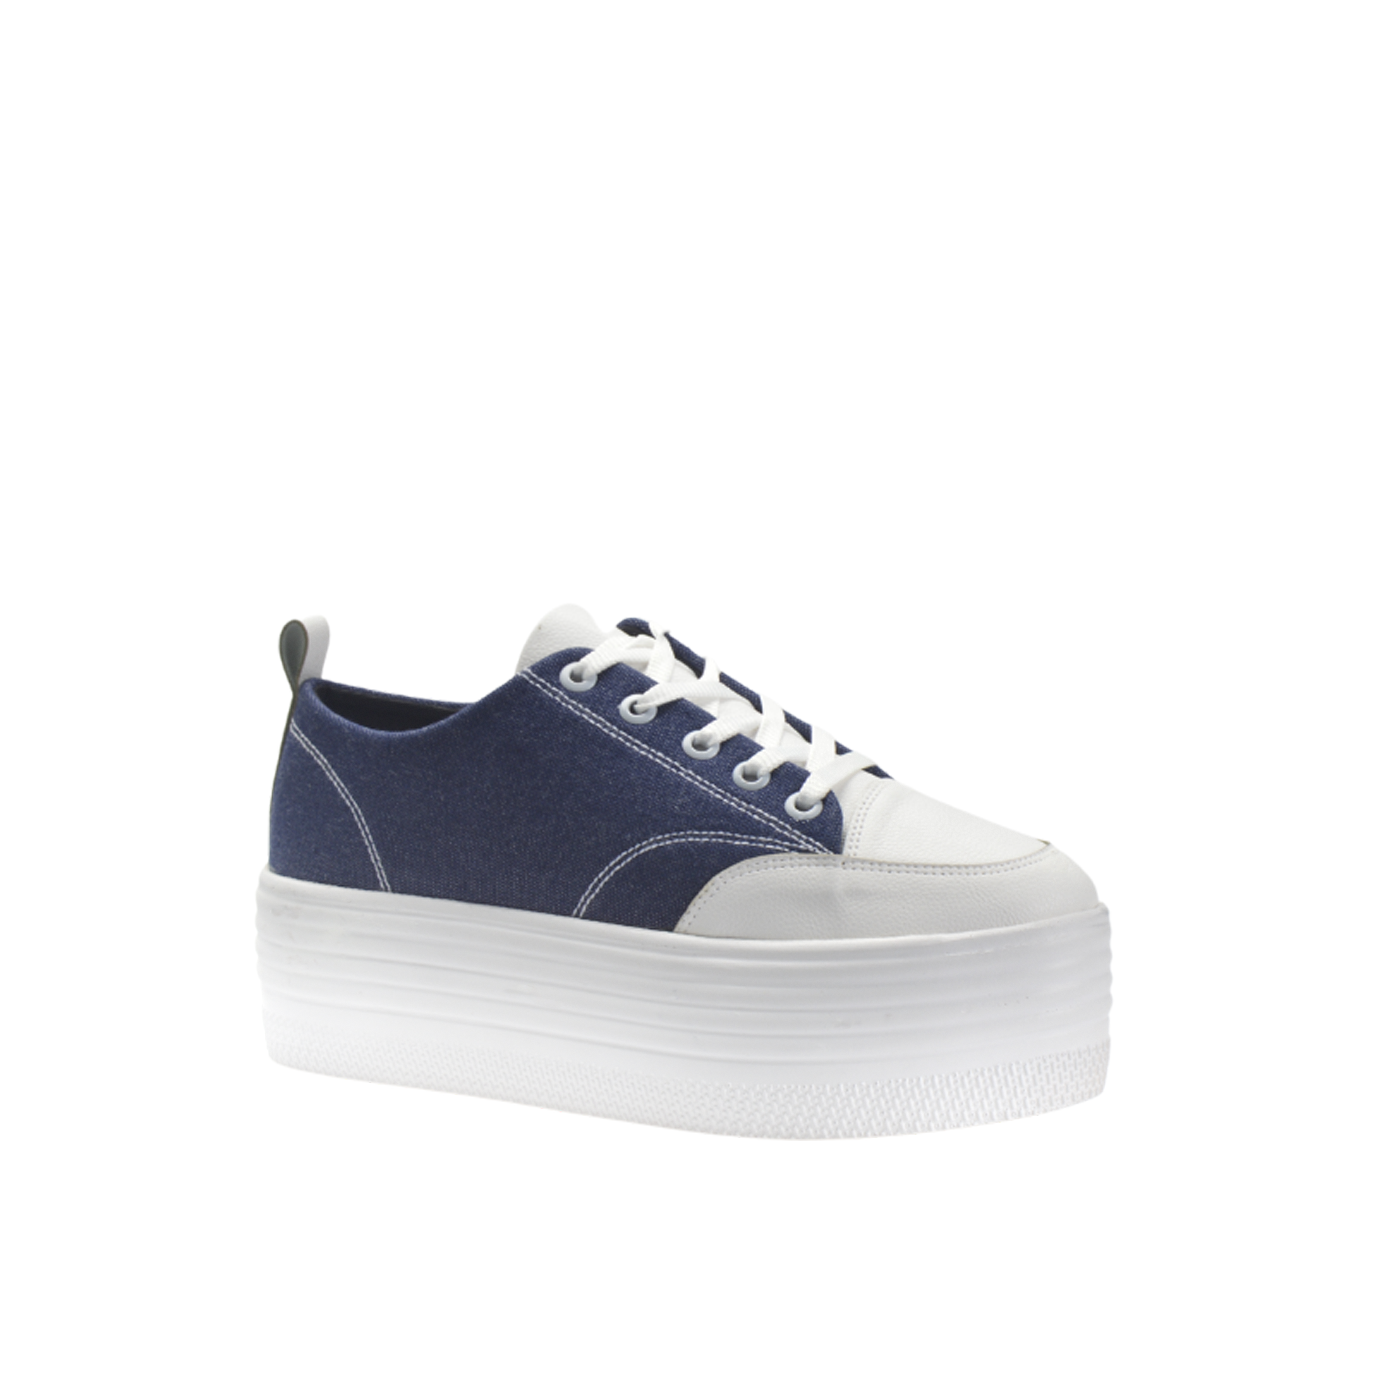 Blue Leather Sneaker with Details